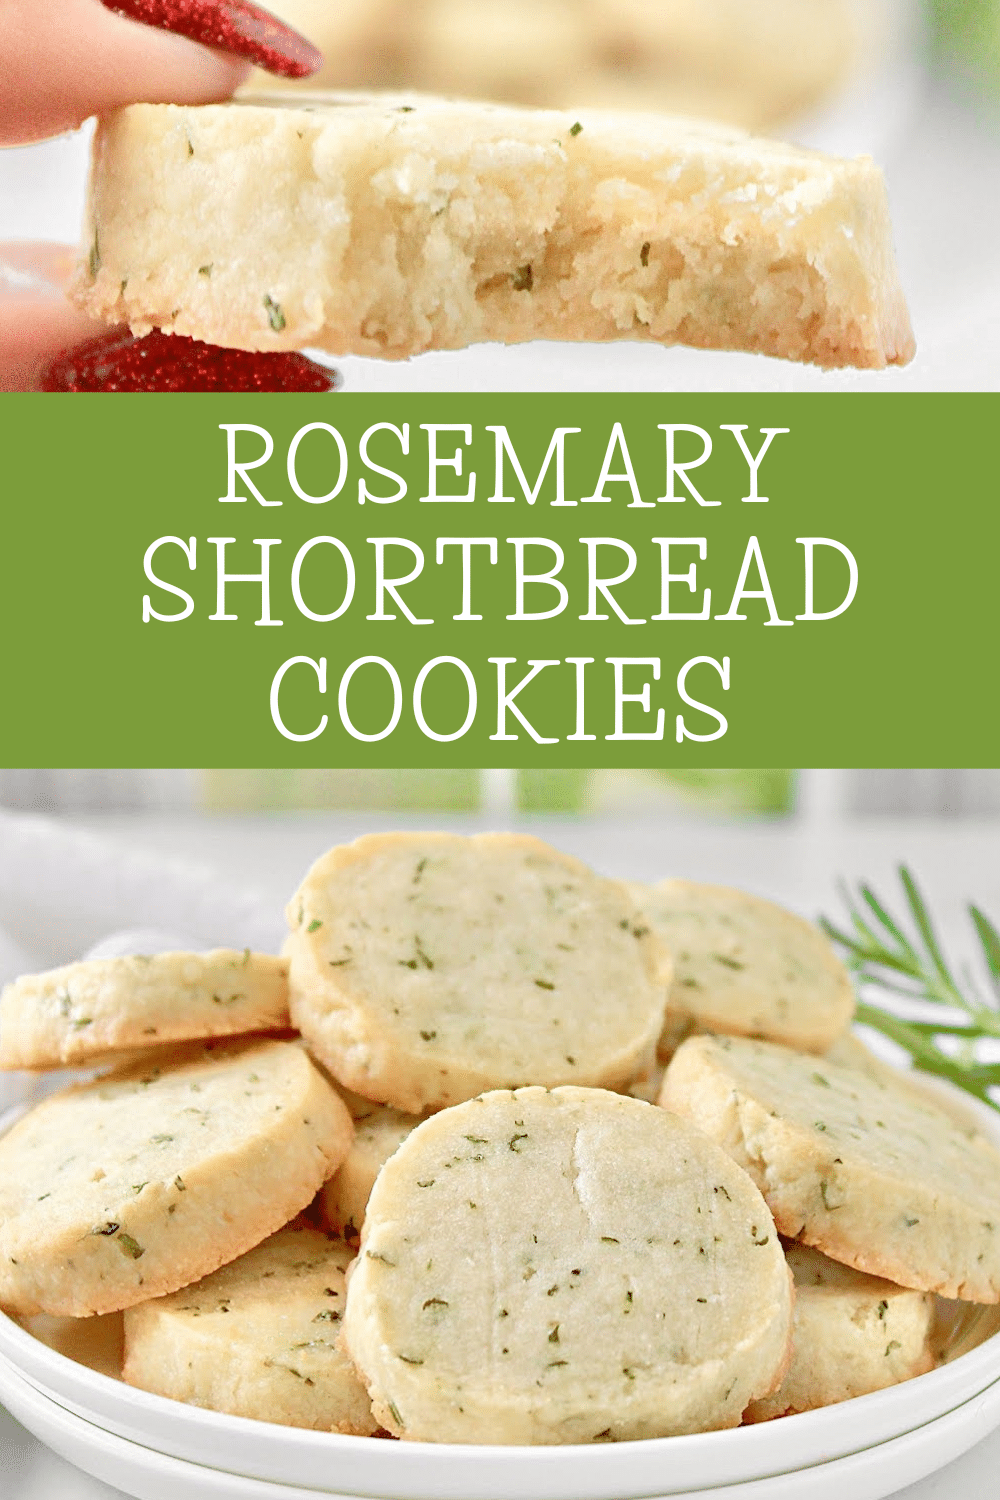 Rosemary Cookies ~ Deliciously buttery shortbread cookies studded with fresh rosemary. Easy to make and perfect as a savory treat with hot tea! via @thiswifecooks